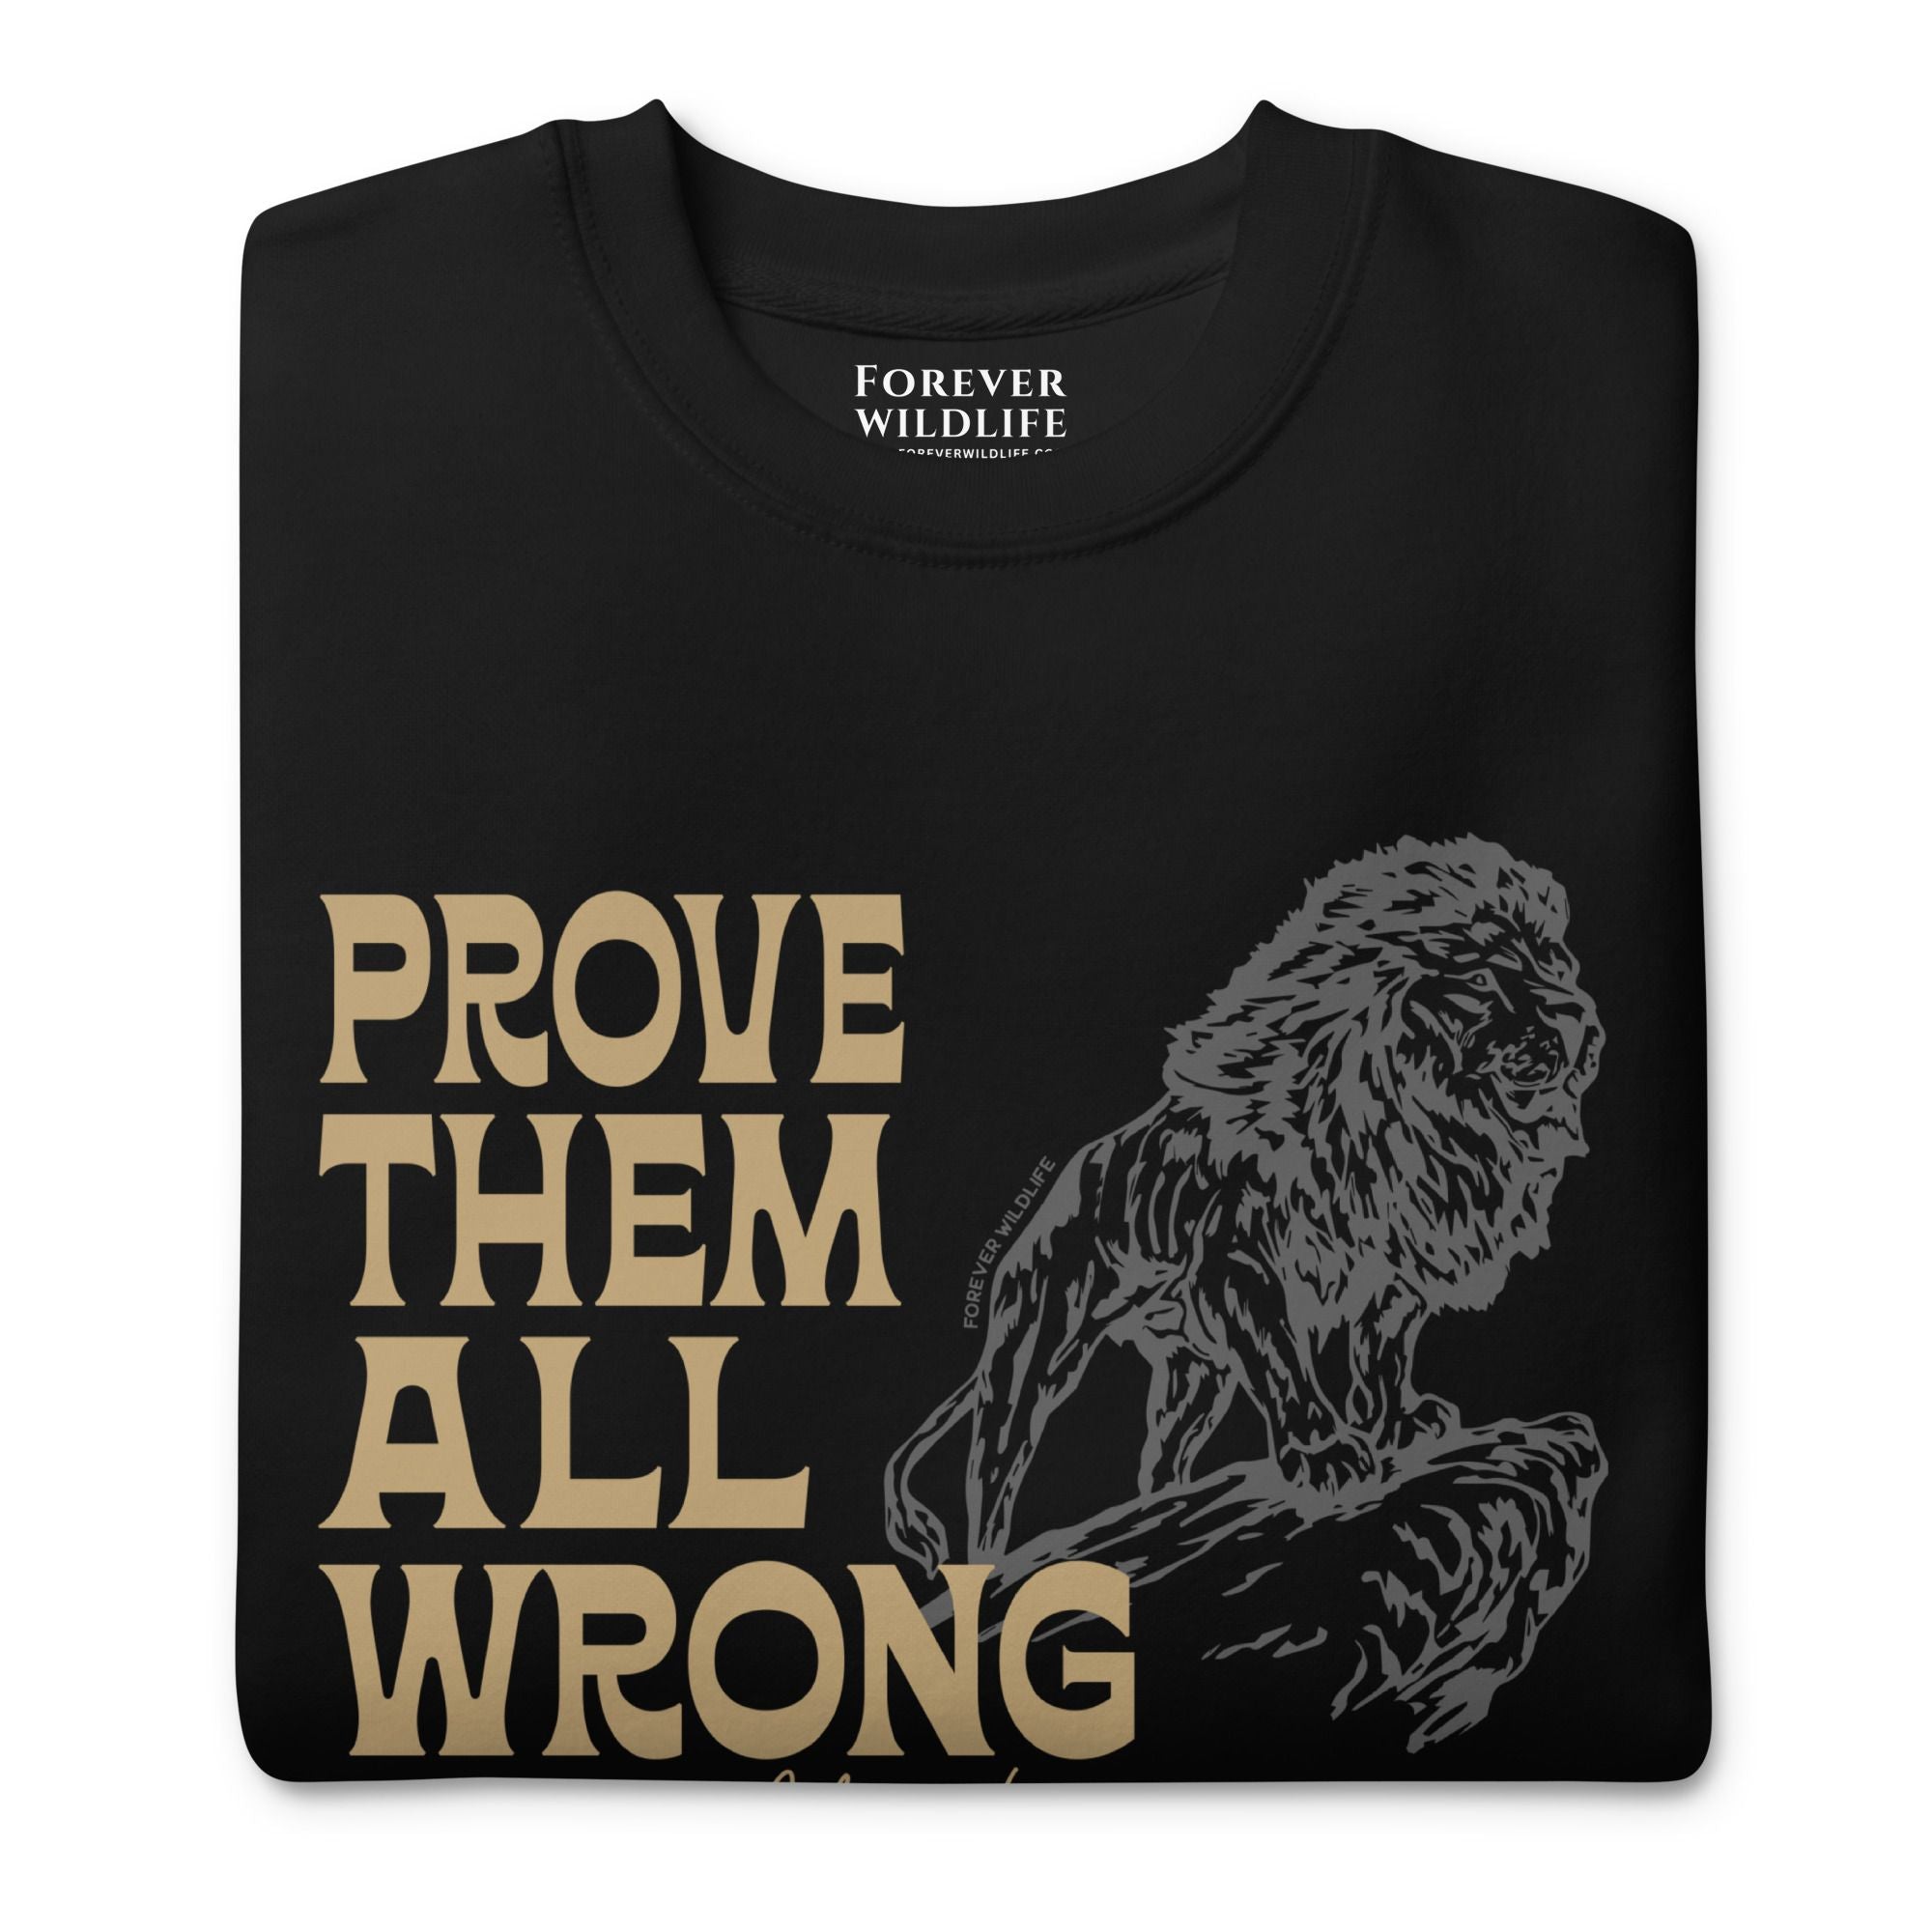 Lion Sweatshirt in Black-Premium Wildlife Animal Inspiration Sweatshirt Design with 'Prove Them All Wrong About You' text, part of Wildlife Sweatshirts & Clothing from Forever Wildlife.